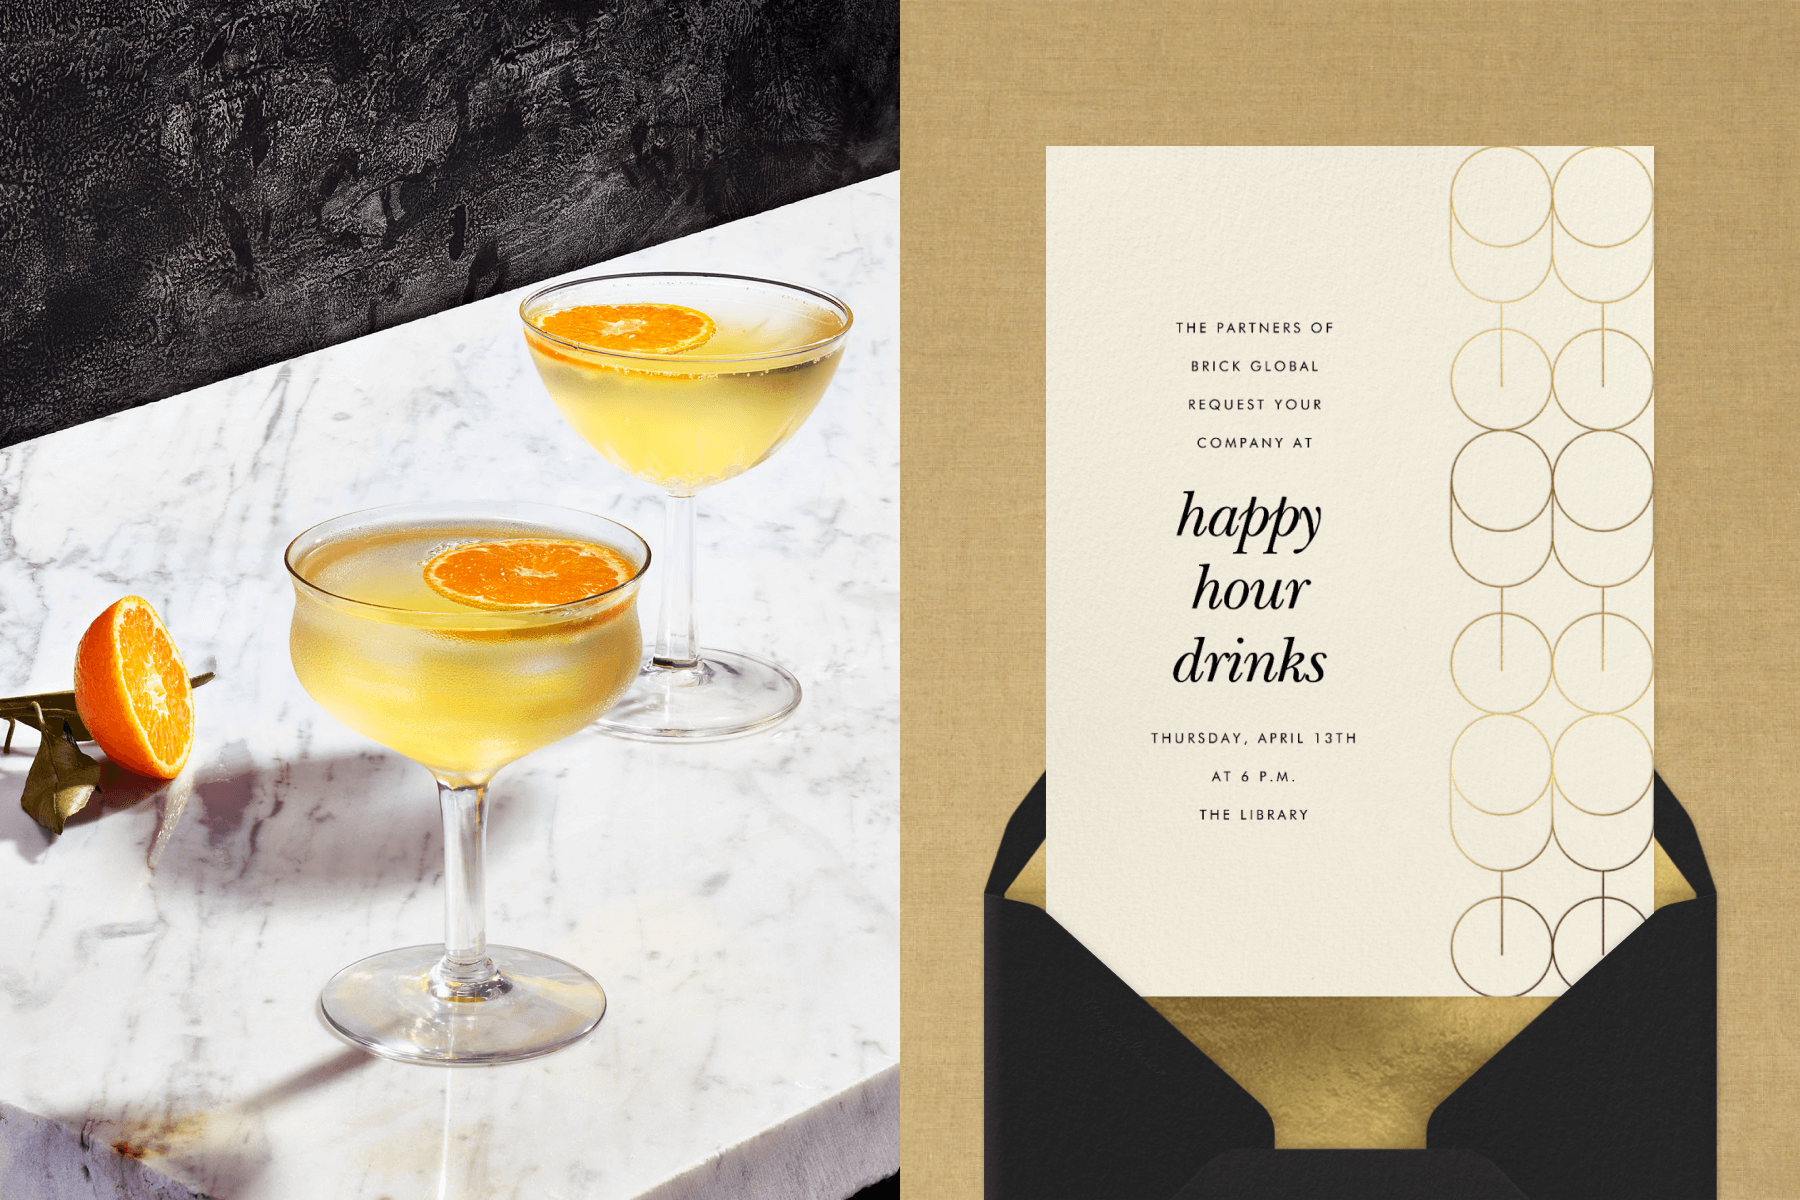 Left: Two orange-colored cocktails both garnished with orange slices sit on top of a white marble bar next to another sliced orange. Right: An invitation for “happy hour drinks” features a gold circular design on its right border and is paired with a black envelope with a gold metallic liner. 